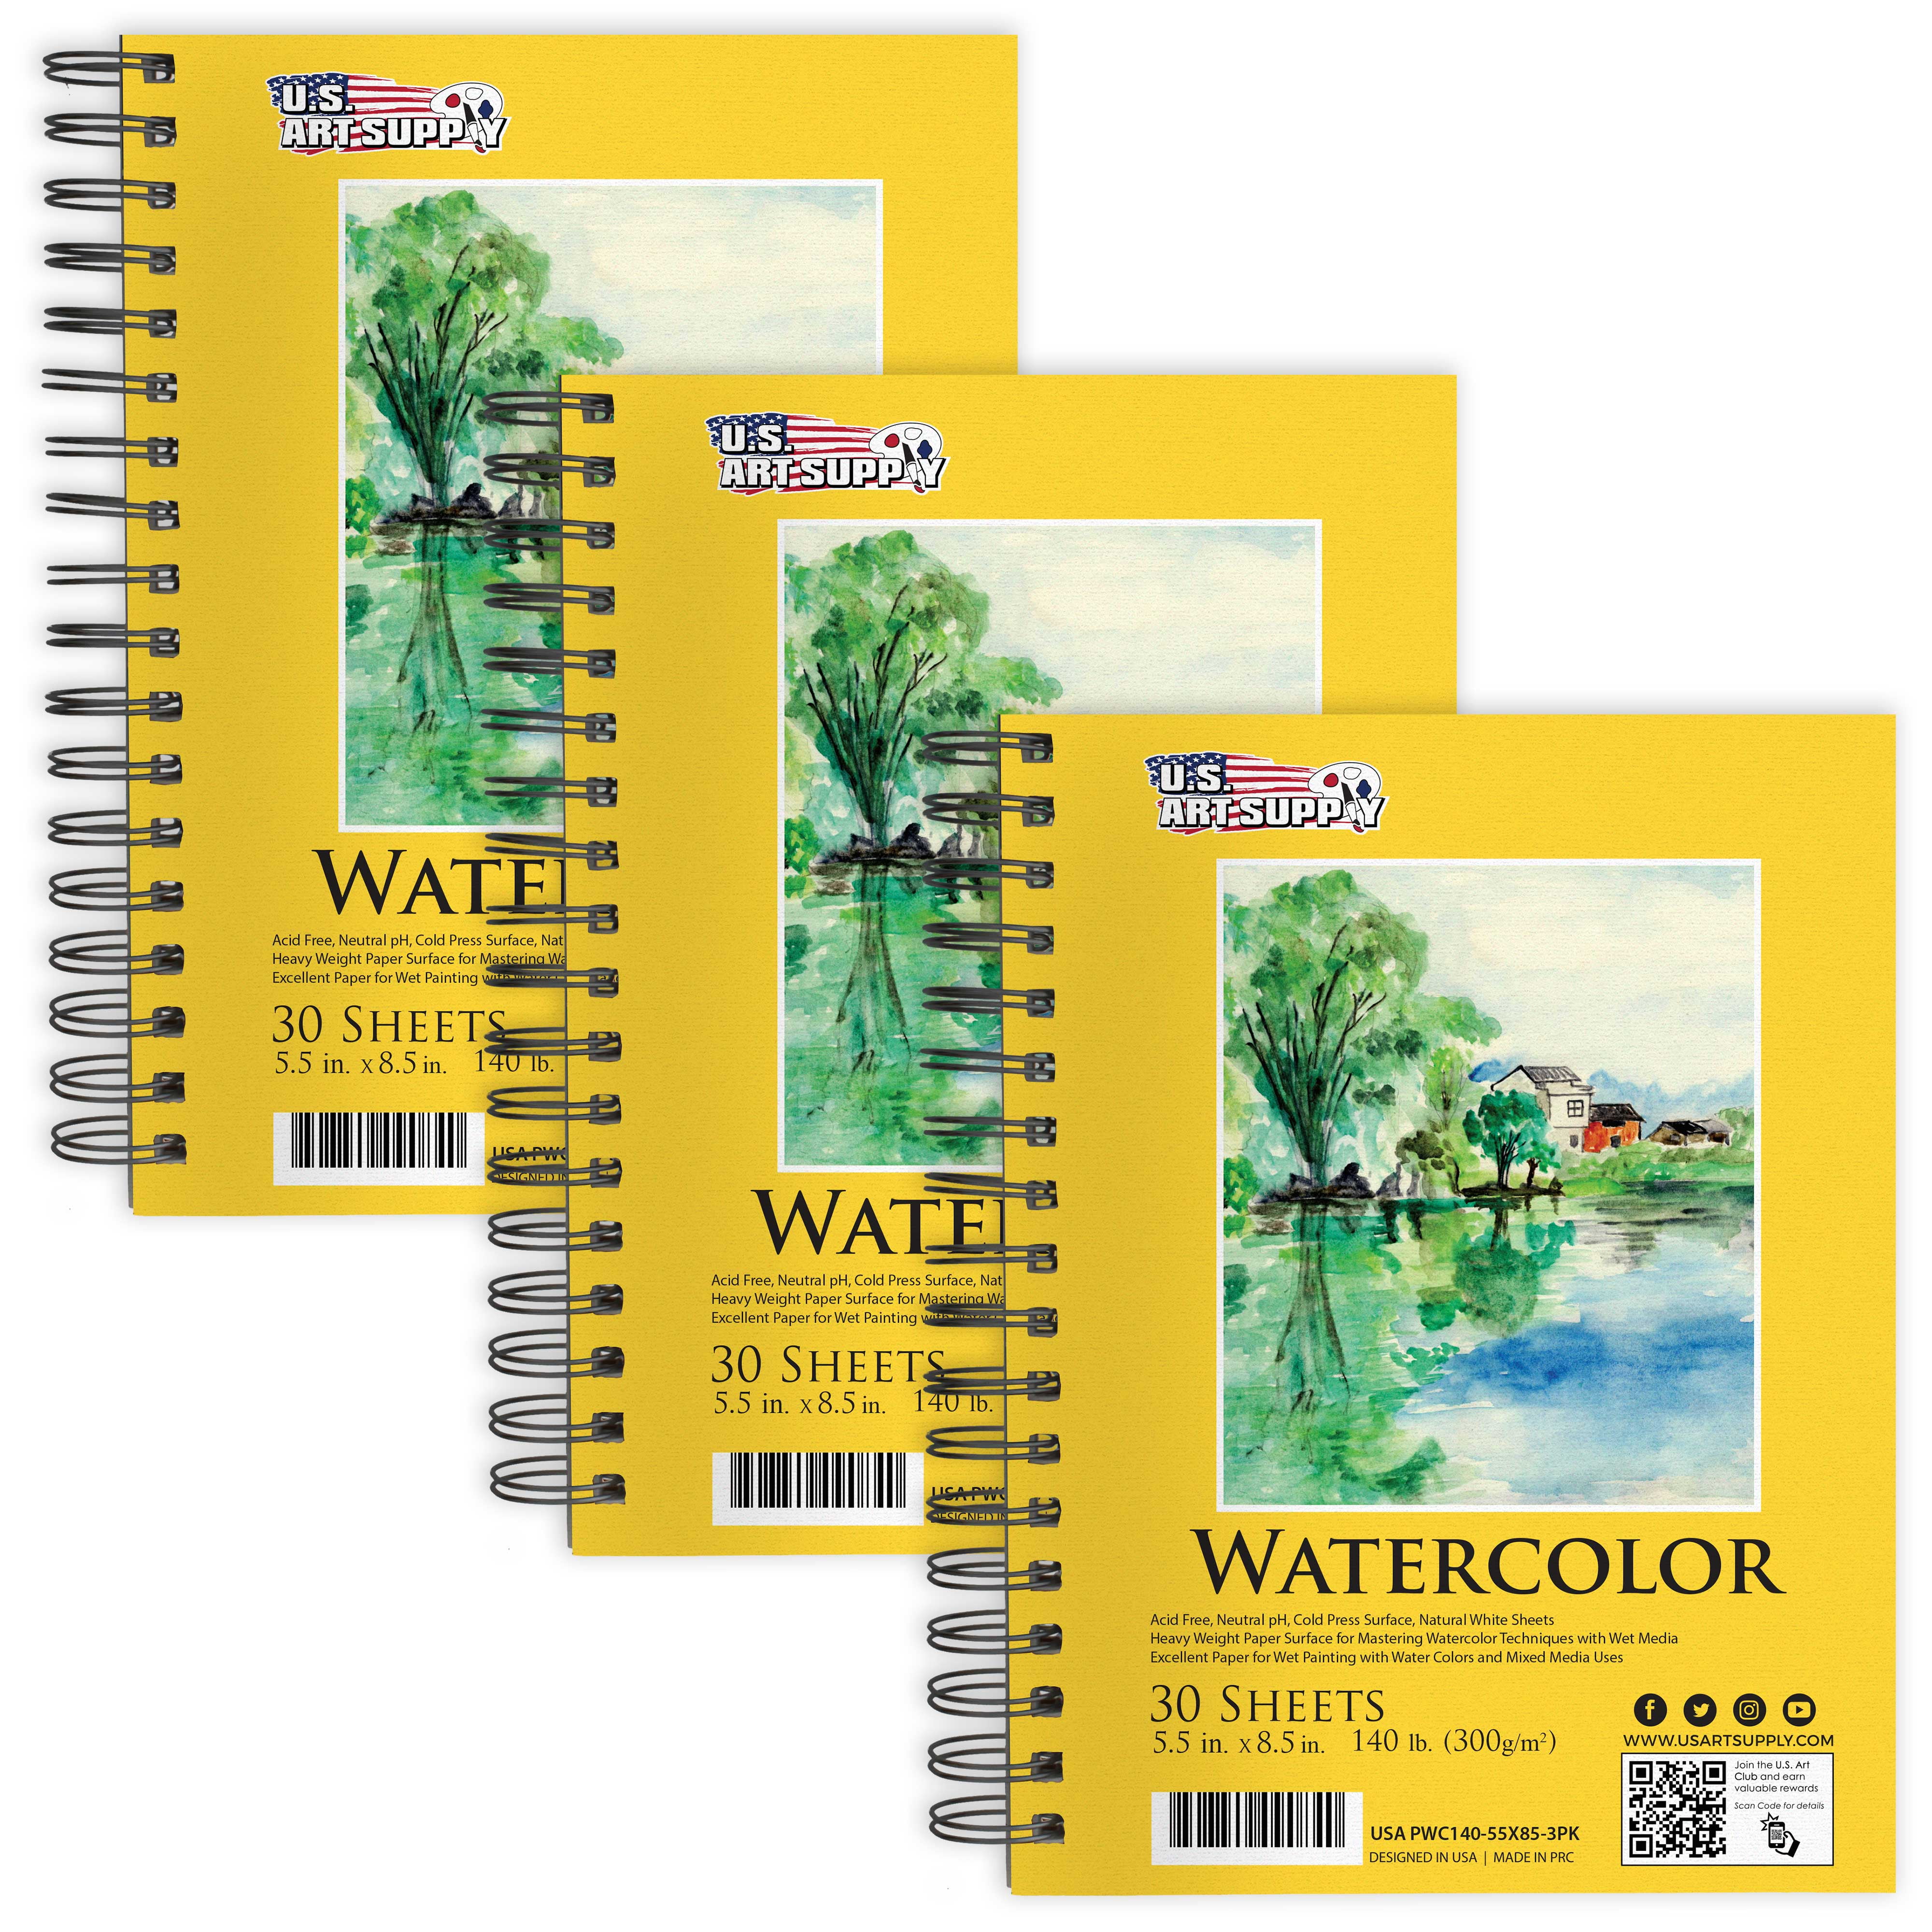 Watercolour Hot press, paper for watercolour and wet/dry art